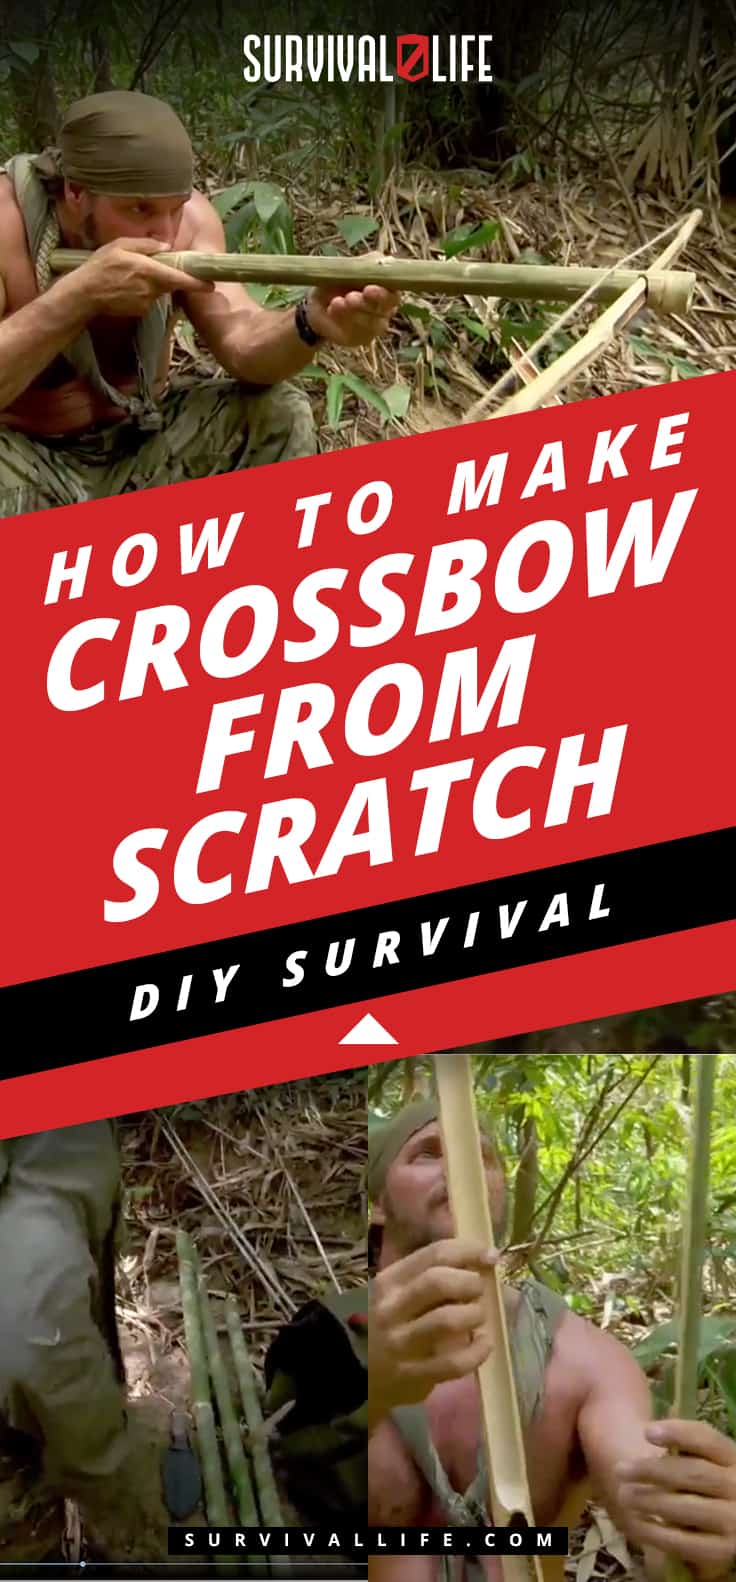 DIY Survival: Make a Crossbow from Scratch